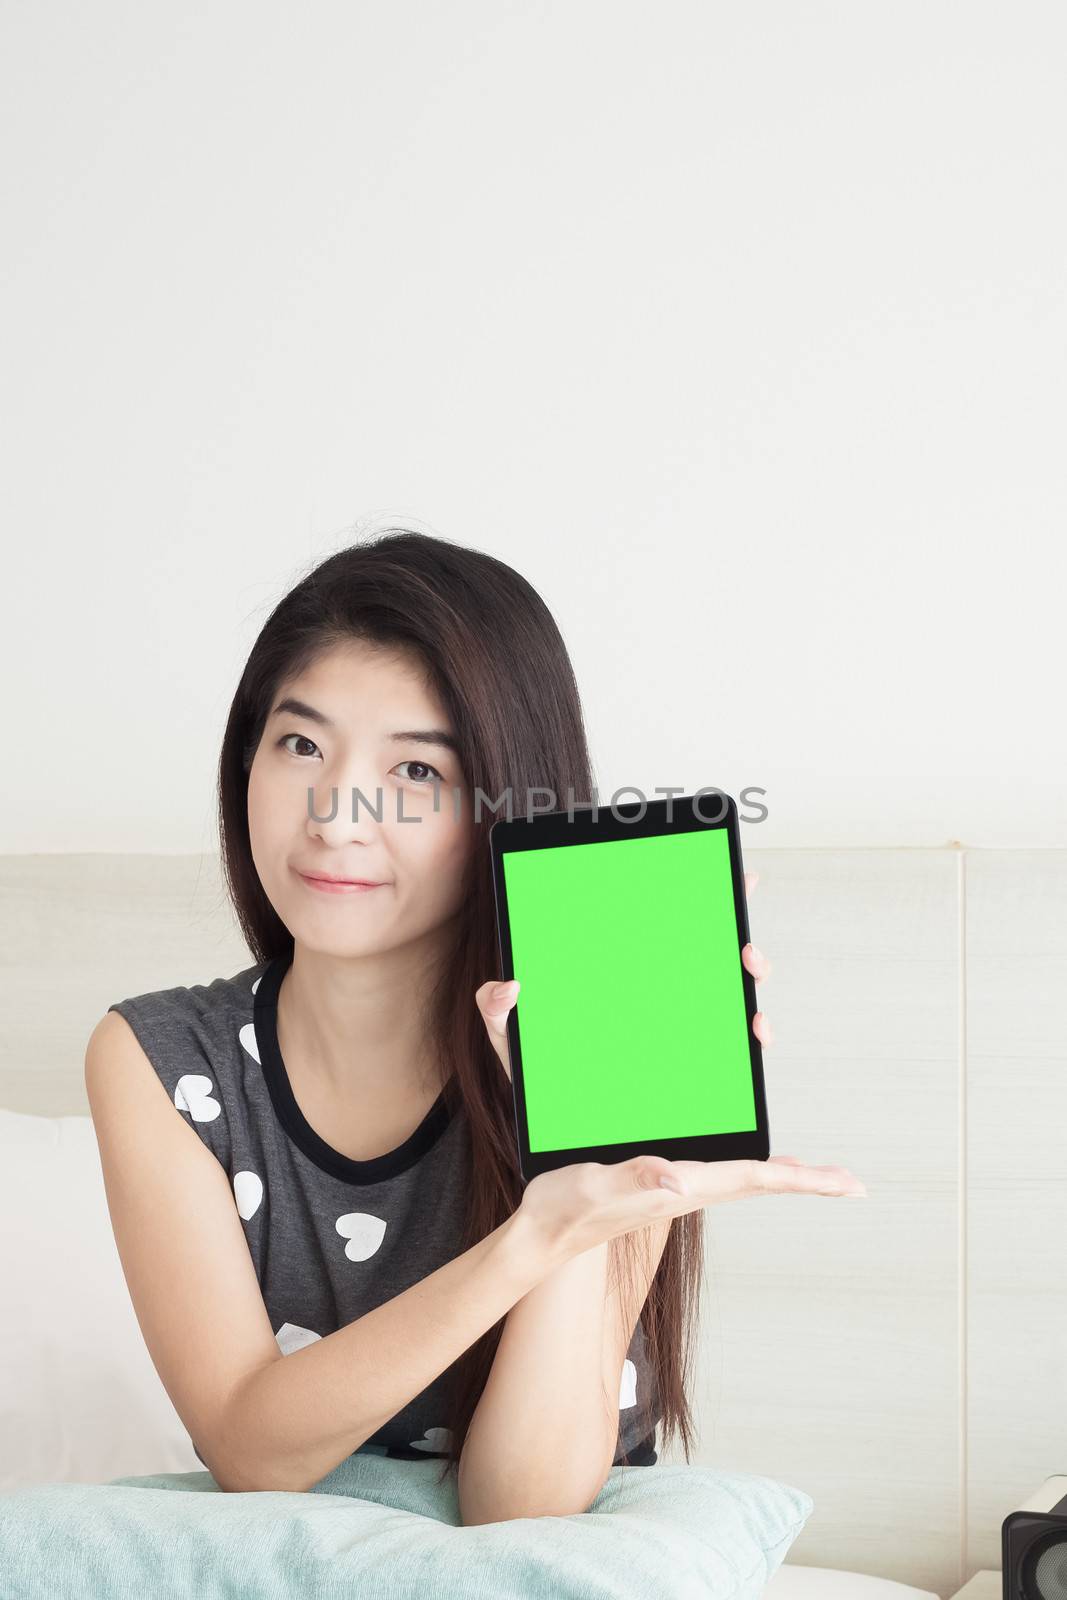 Young Asian woman show or display tablet with green screen